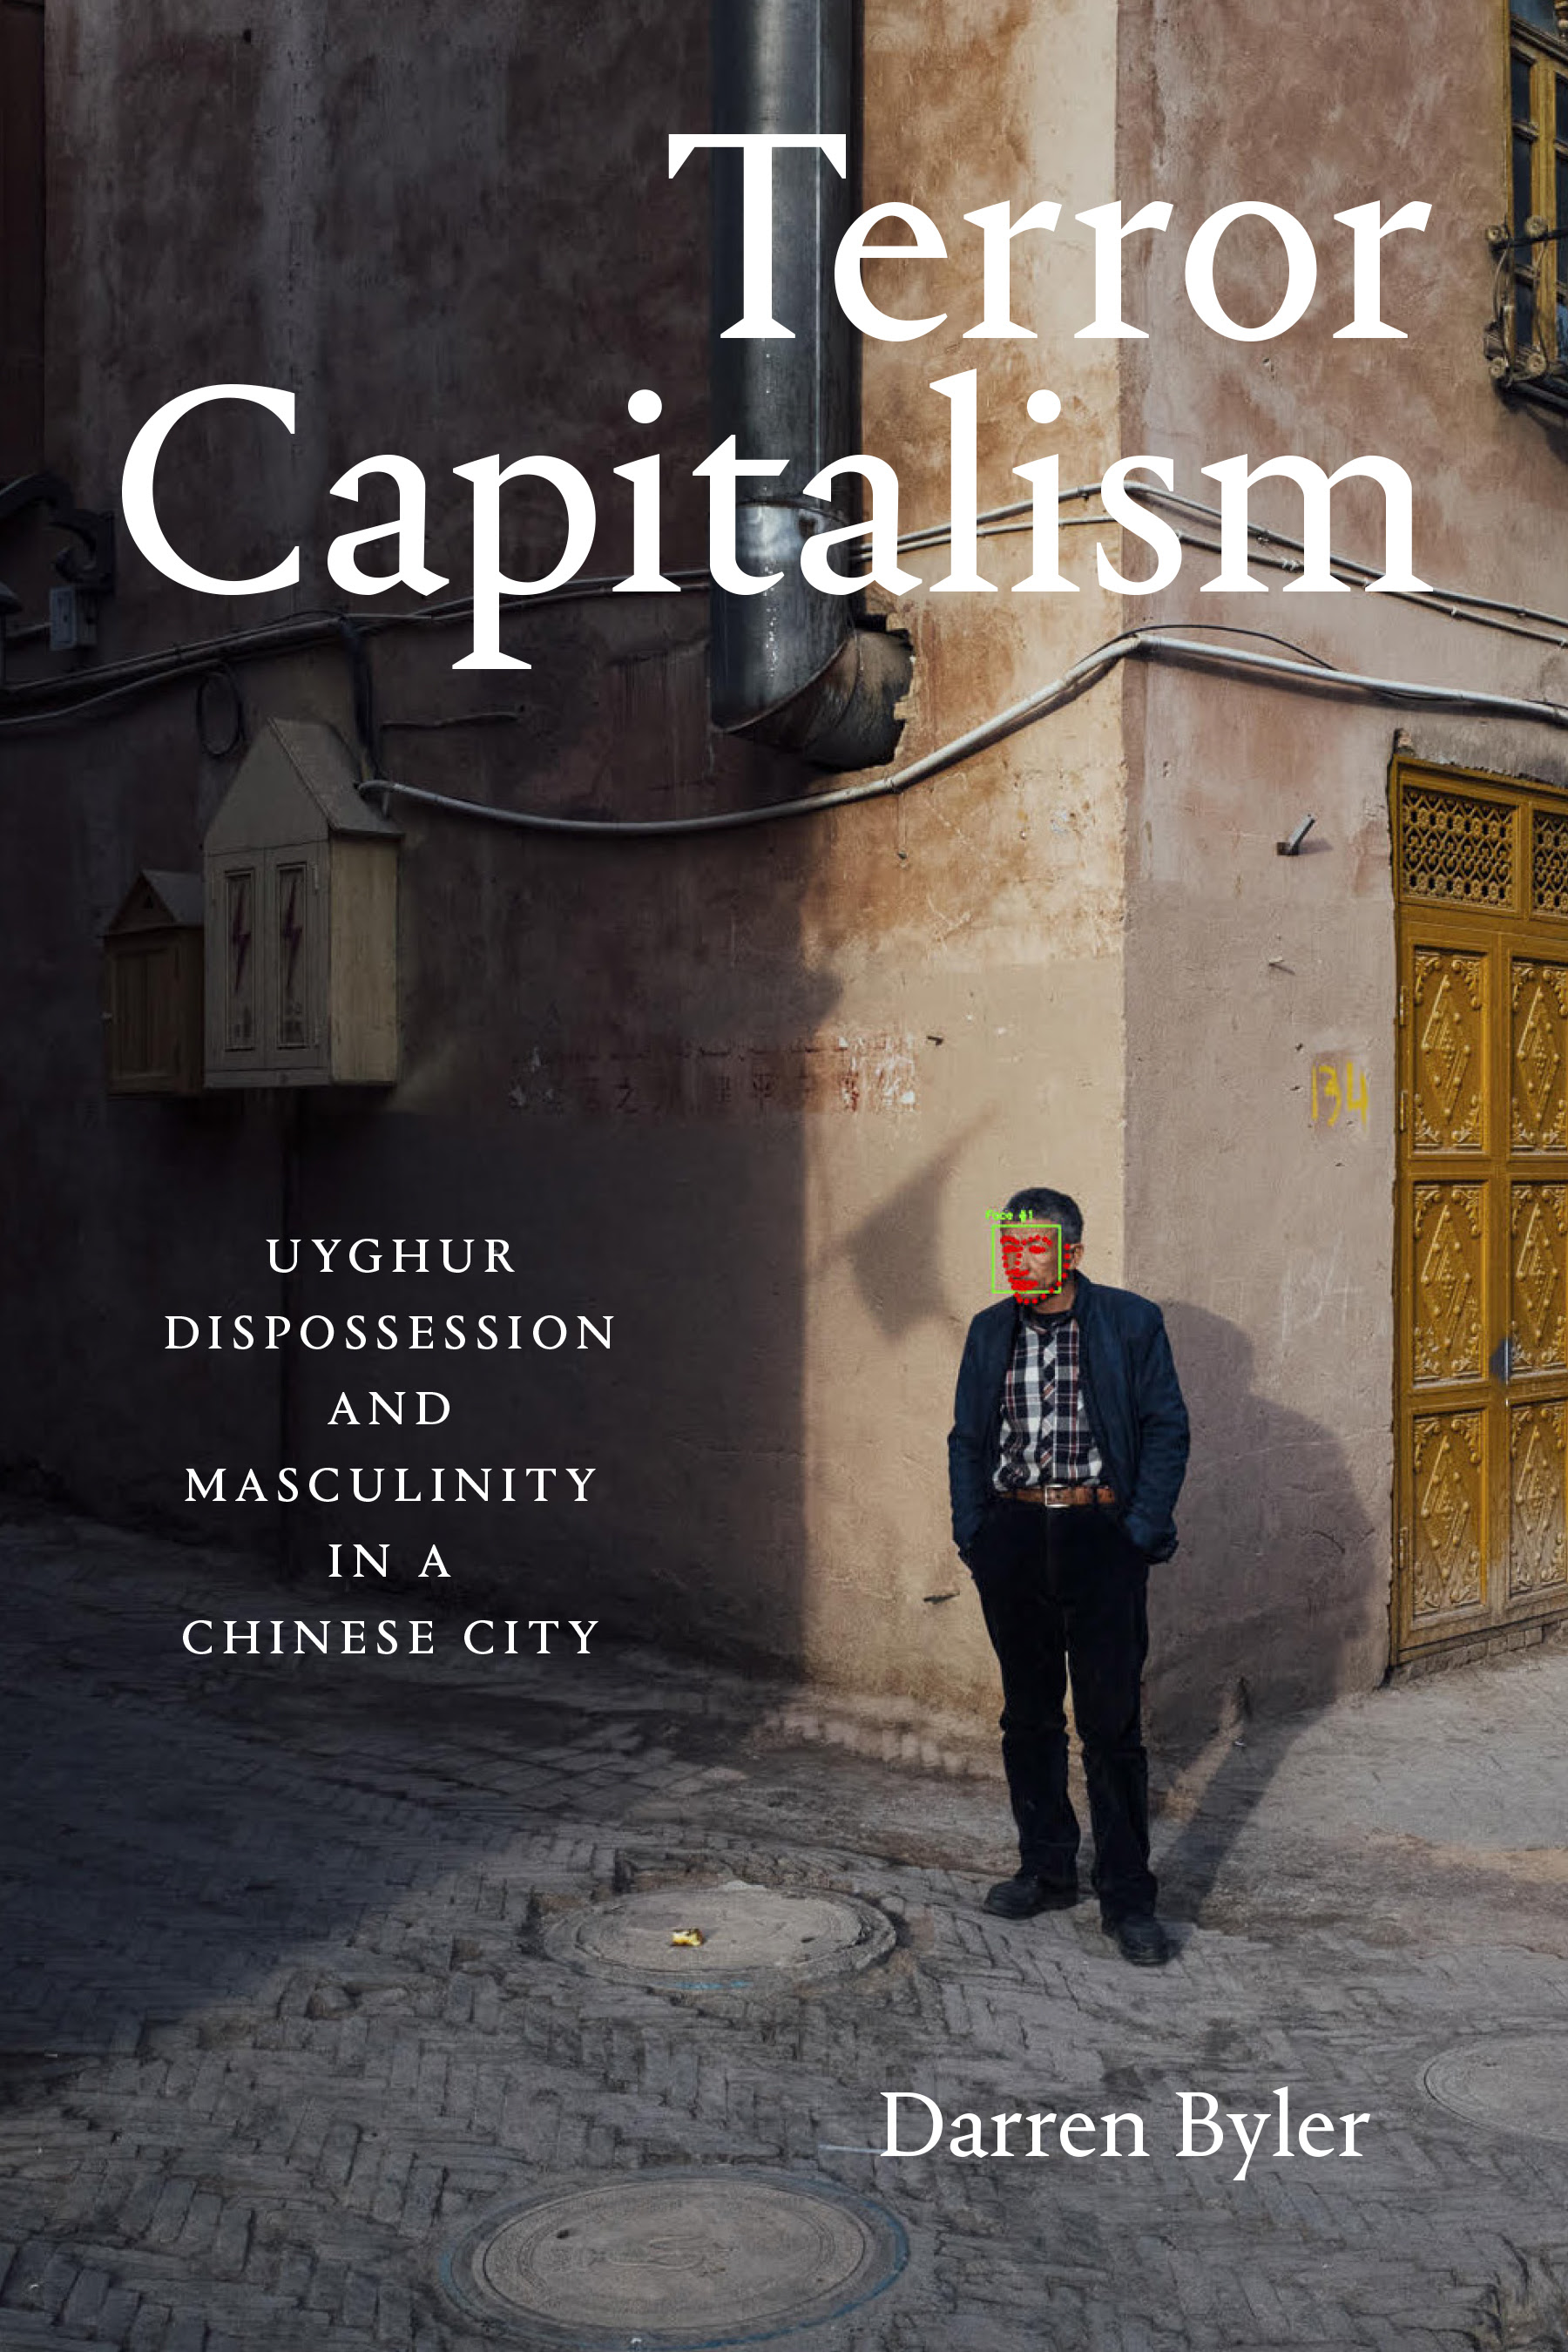 pdf download Terror Capitalism: Uyghur Dispossession and Masculinity in a Chinese City